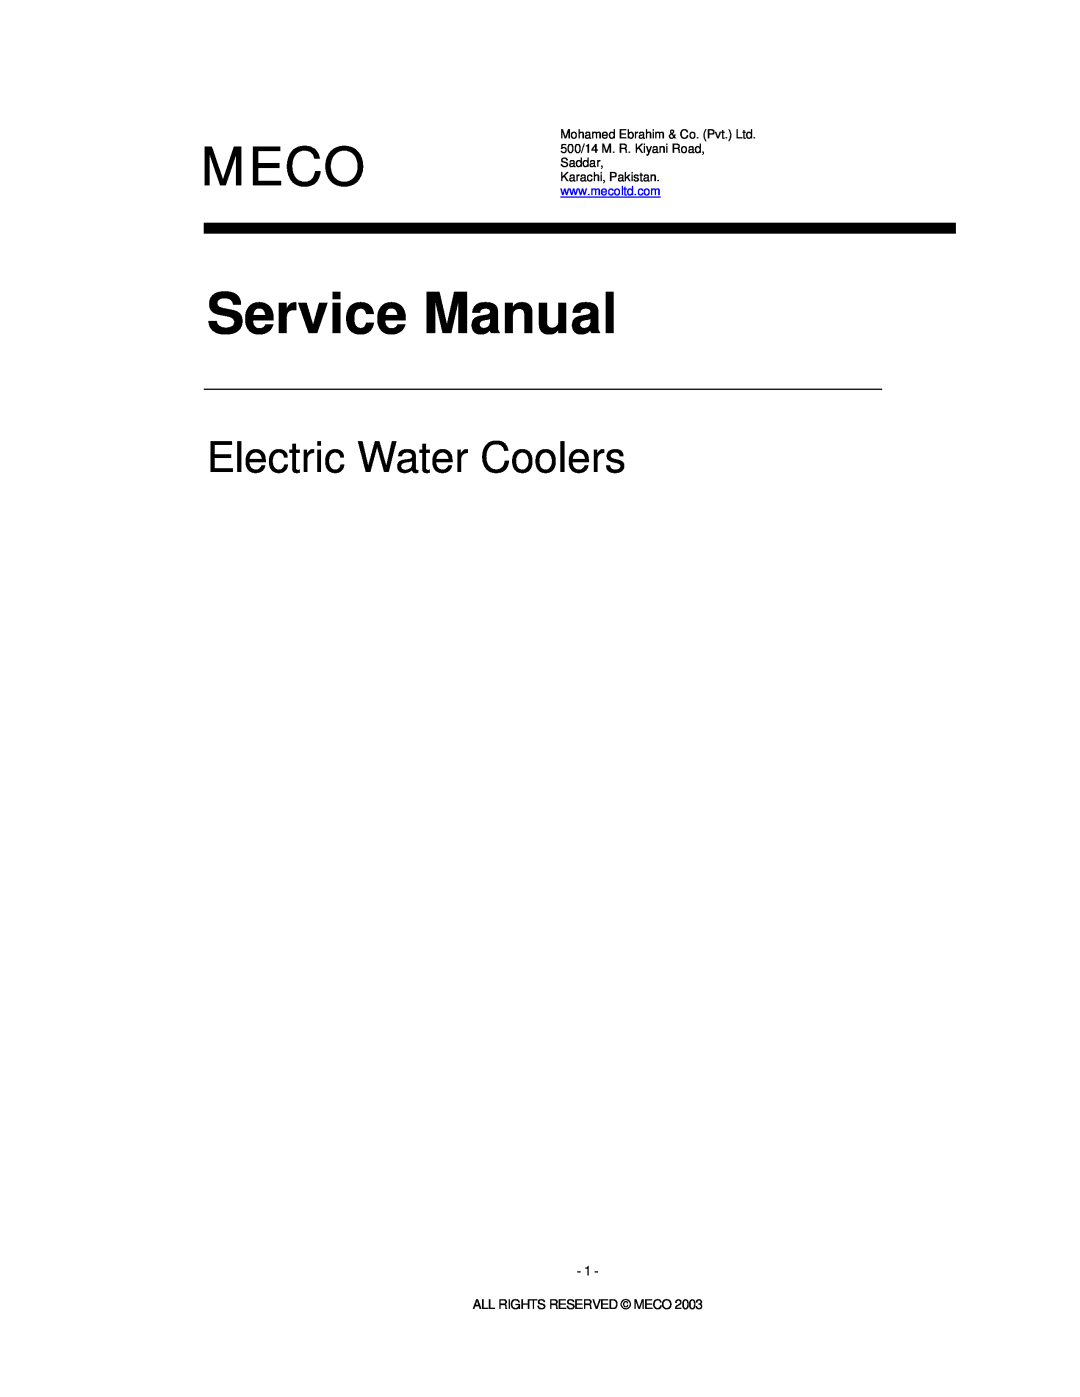 Meco service manual Electric Water Coolers, All Rights Reserved Meco 